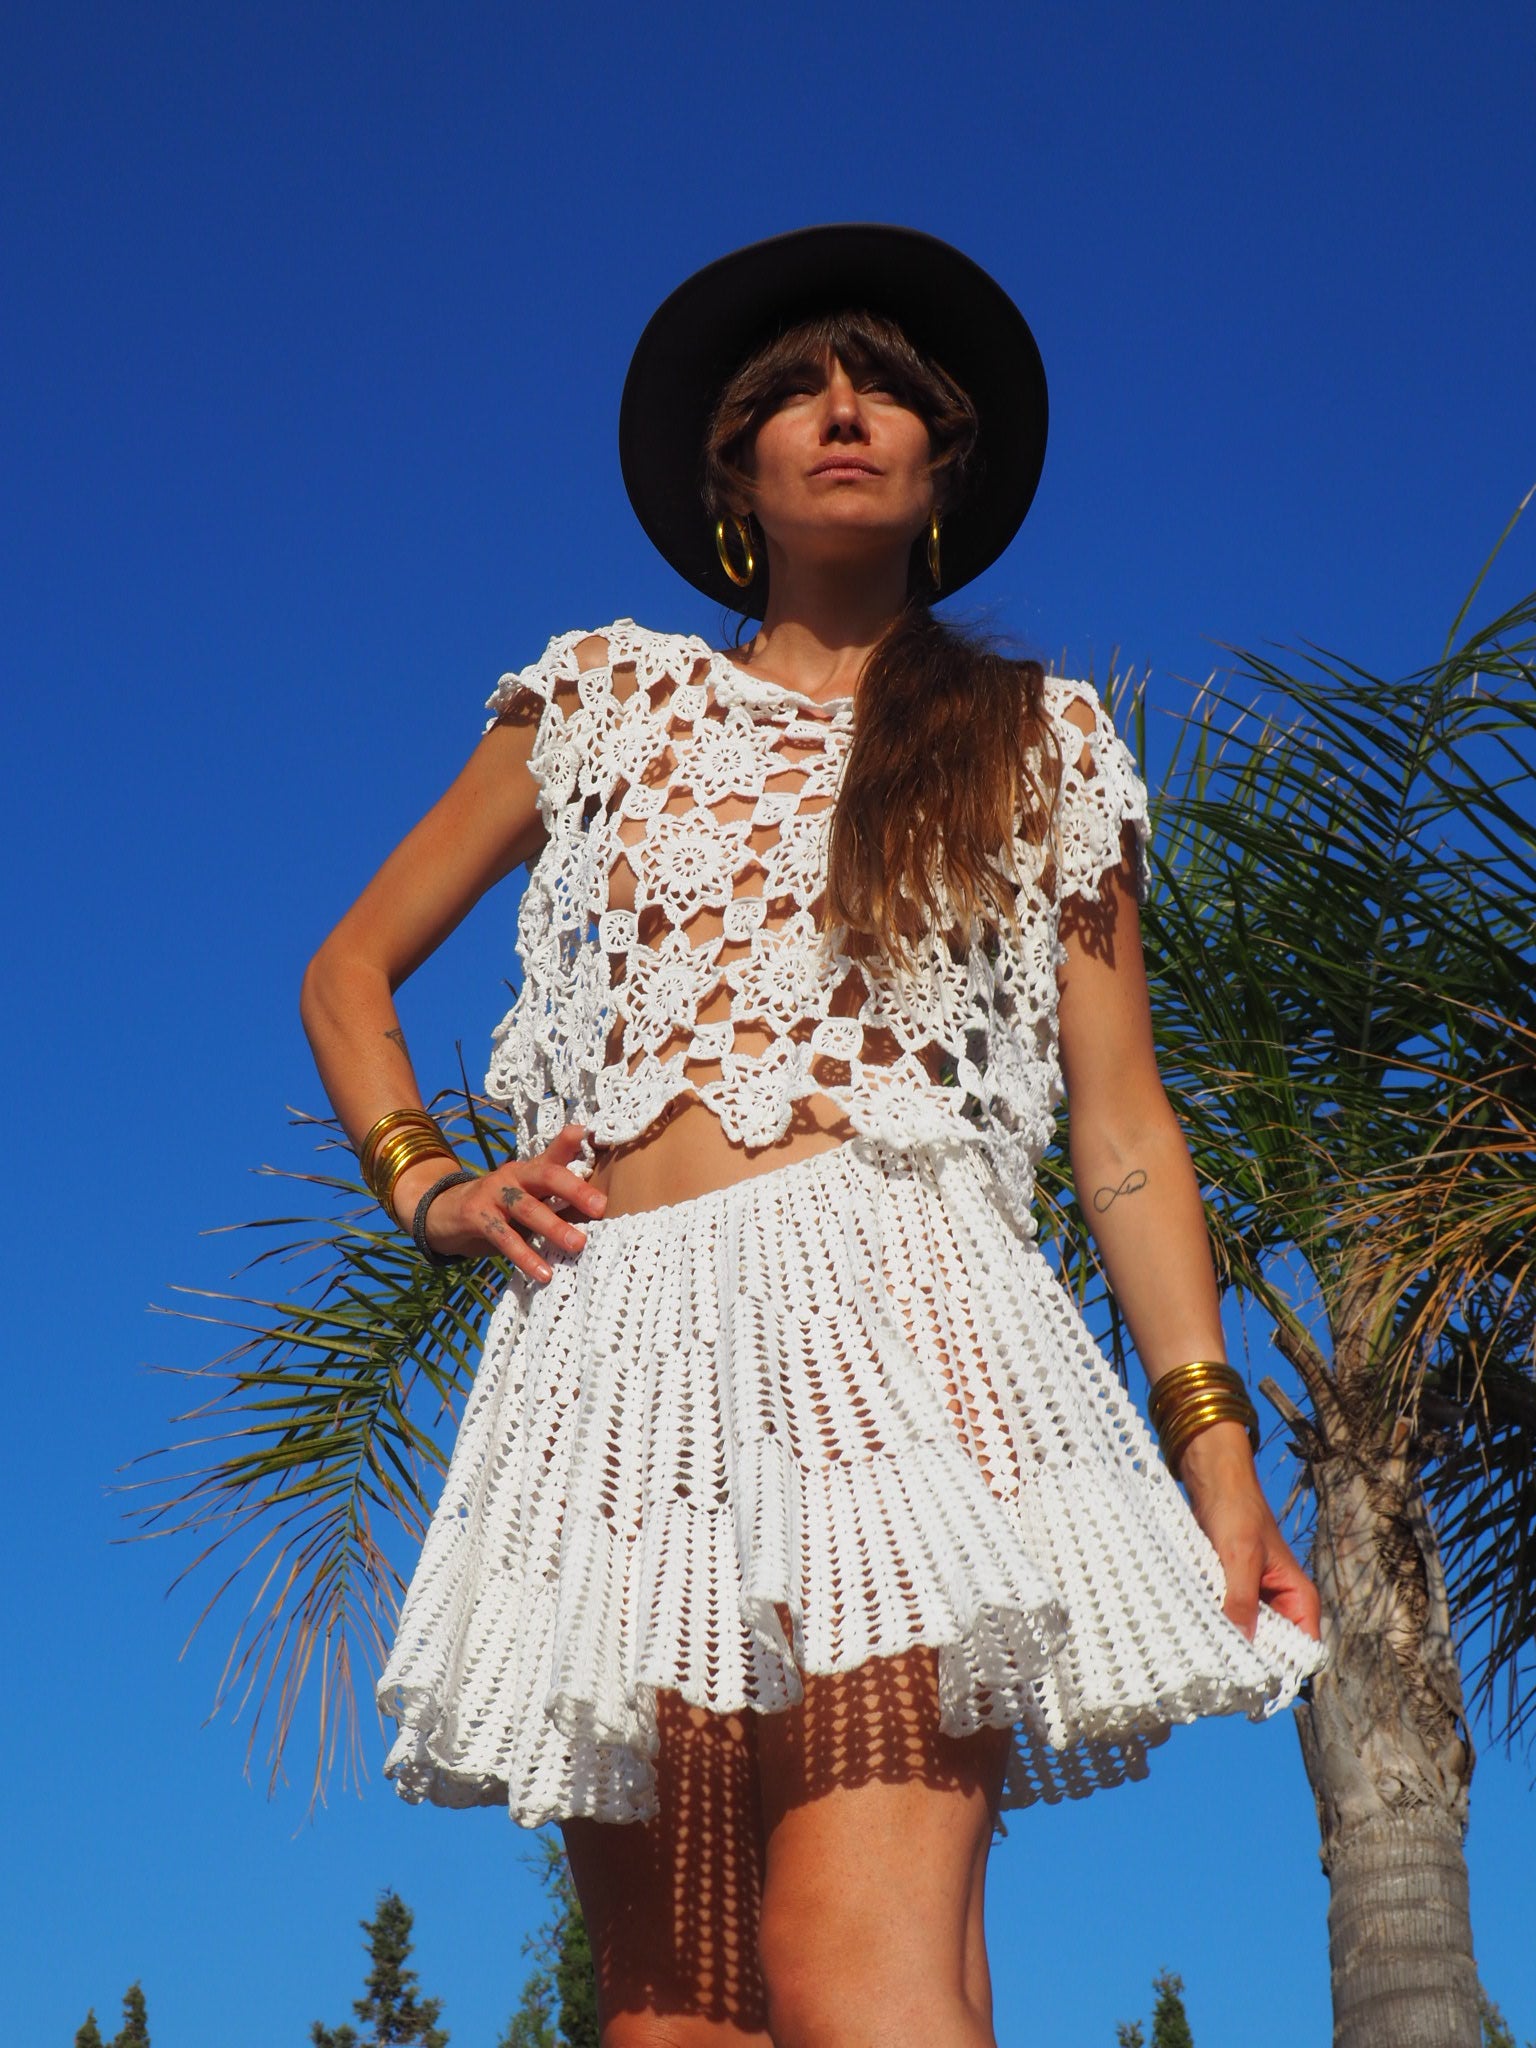 Vintage antique lace crochet up-cycled top made by Vagabond Ibiza